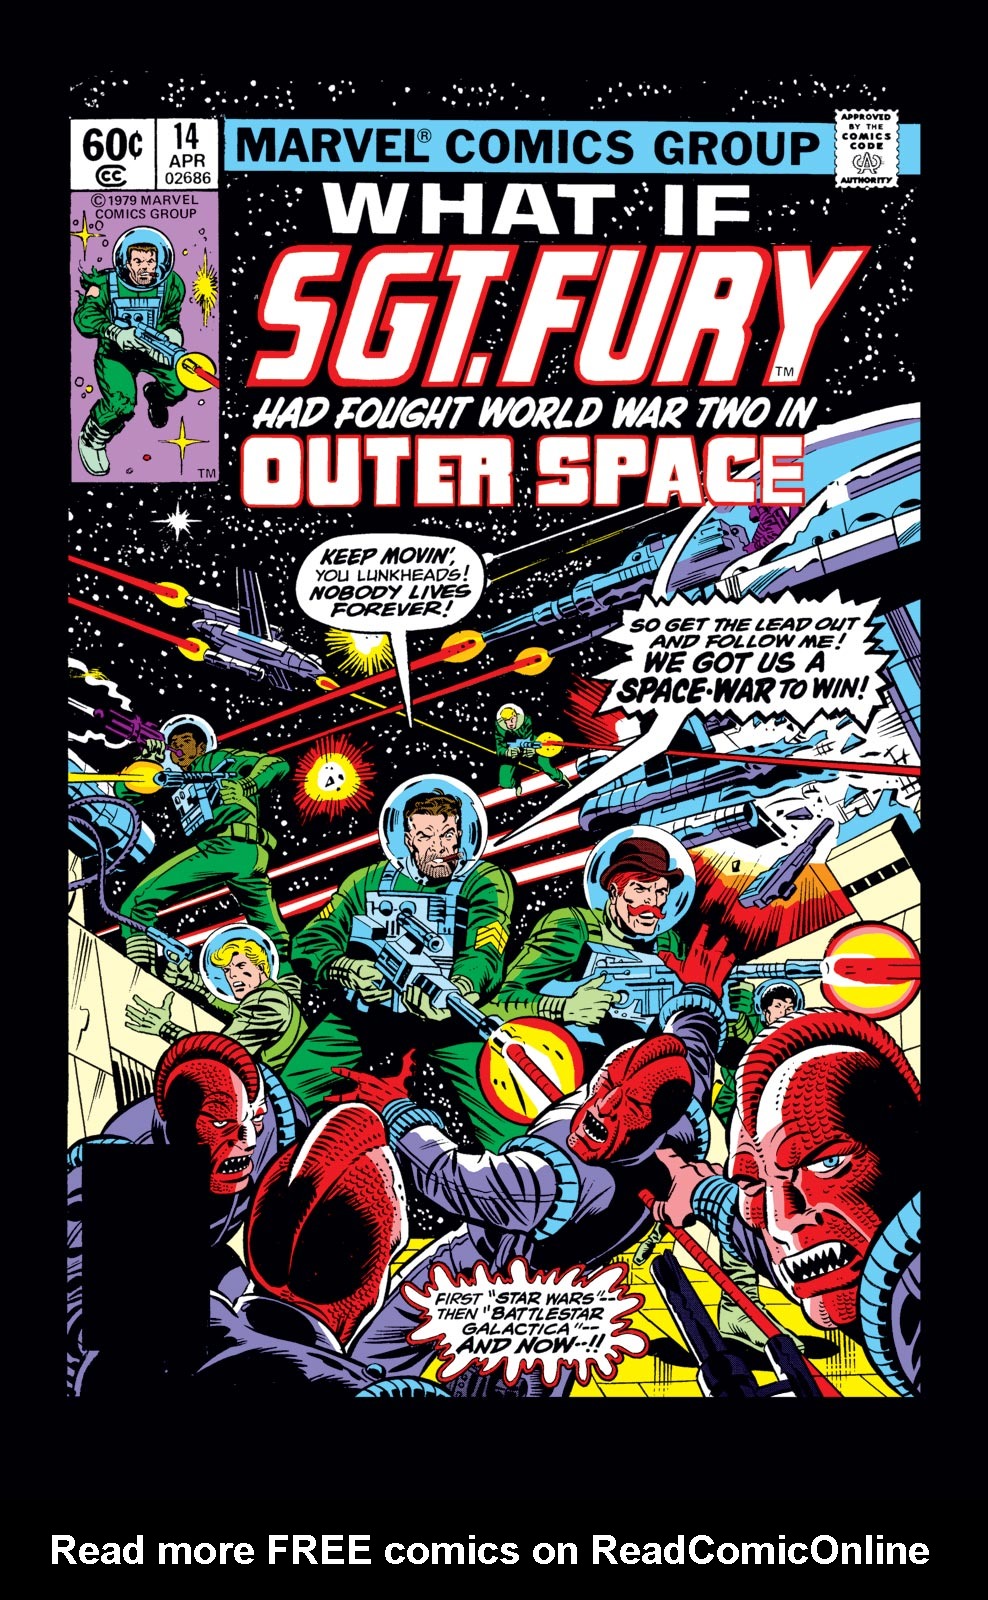 <{ $series->title }} issue 14 - Sgt. Fury had Fought WWII in Outer Space - Page 1